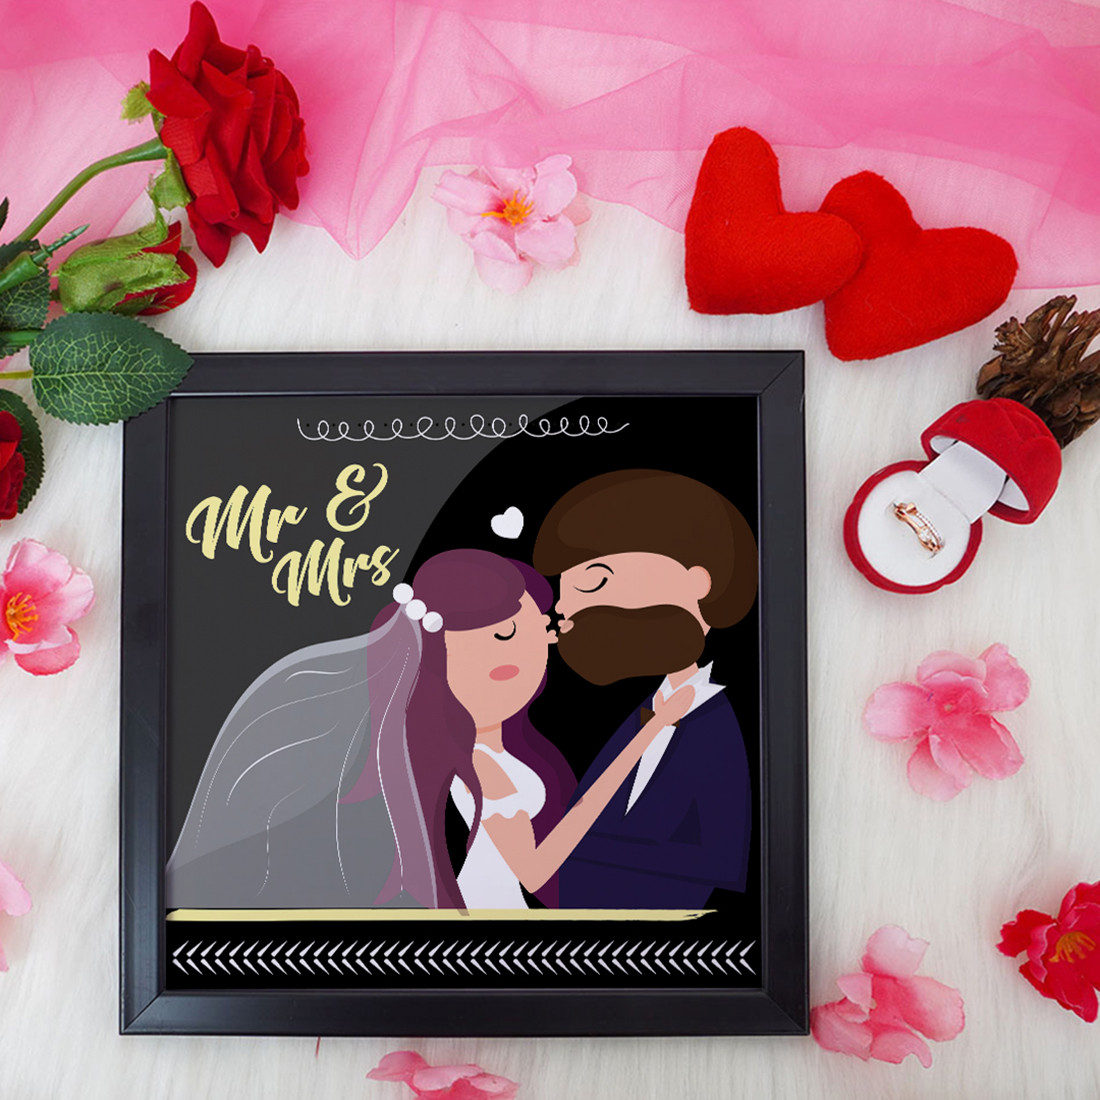 Mr & Mrs Valentine Gift Set | Valentine's Day Gifts for Girlfriend | Valentine Gift for Wife | Ring for Women/Girl | Photo Frame (8x8 Inches)